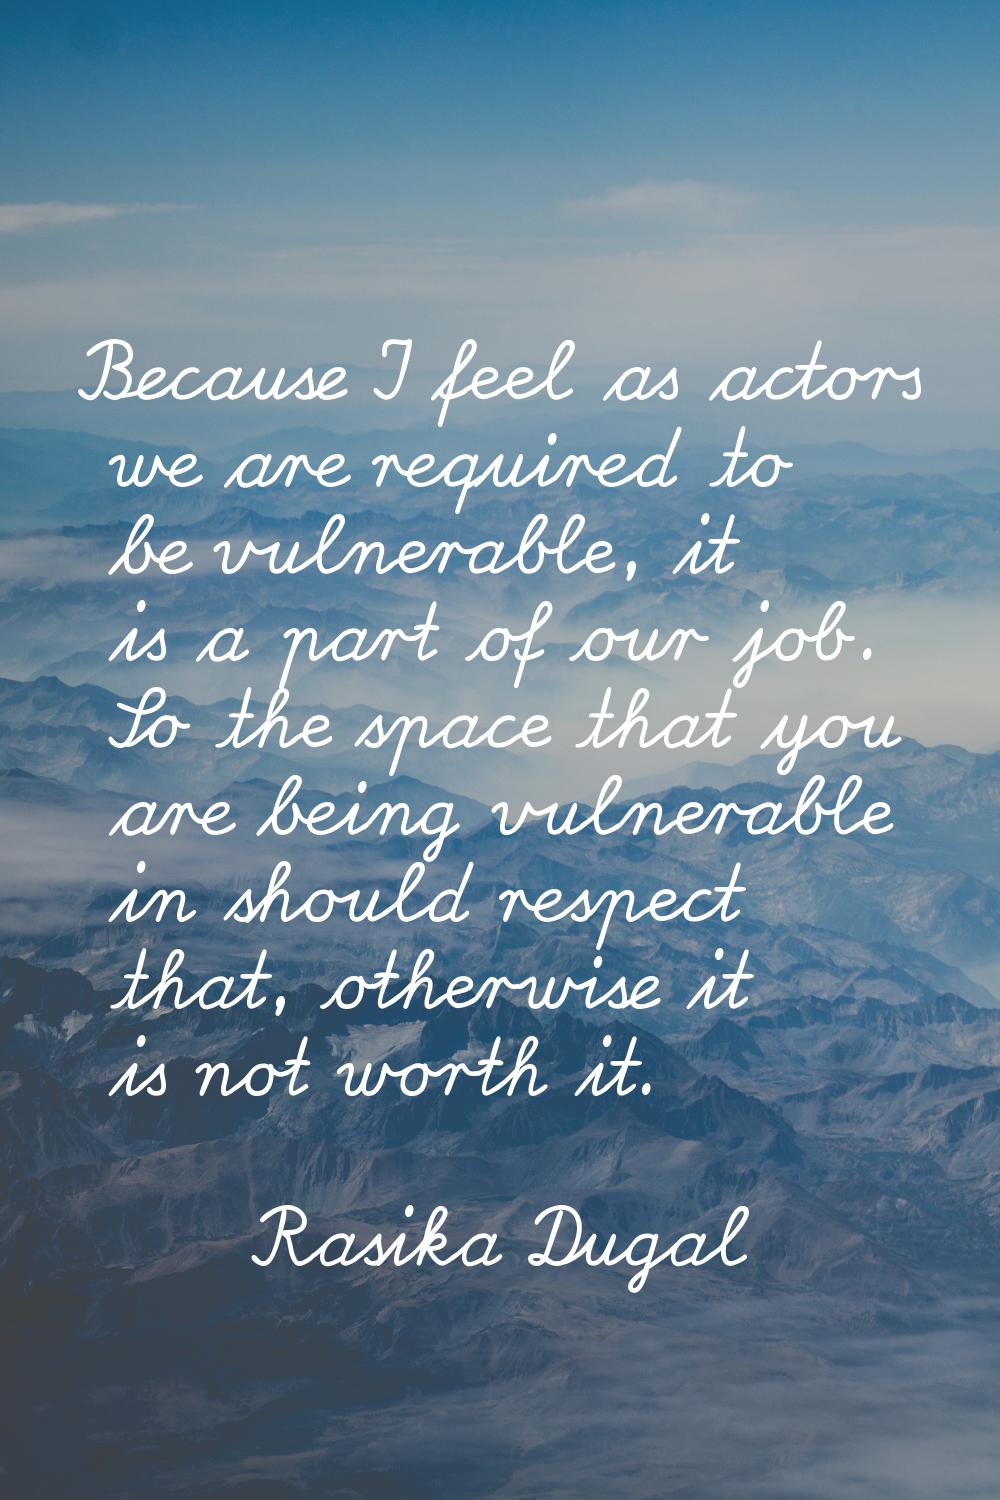 Because I feel as actors we are required to be vulnerable, it is a part of our job. So the space th